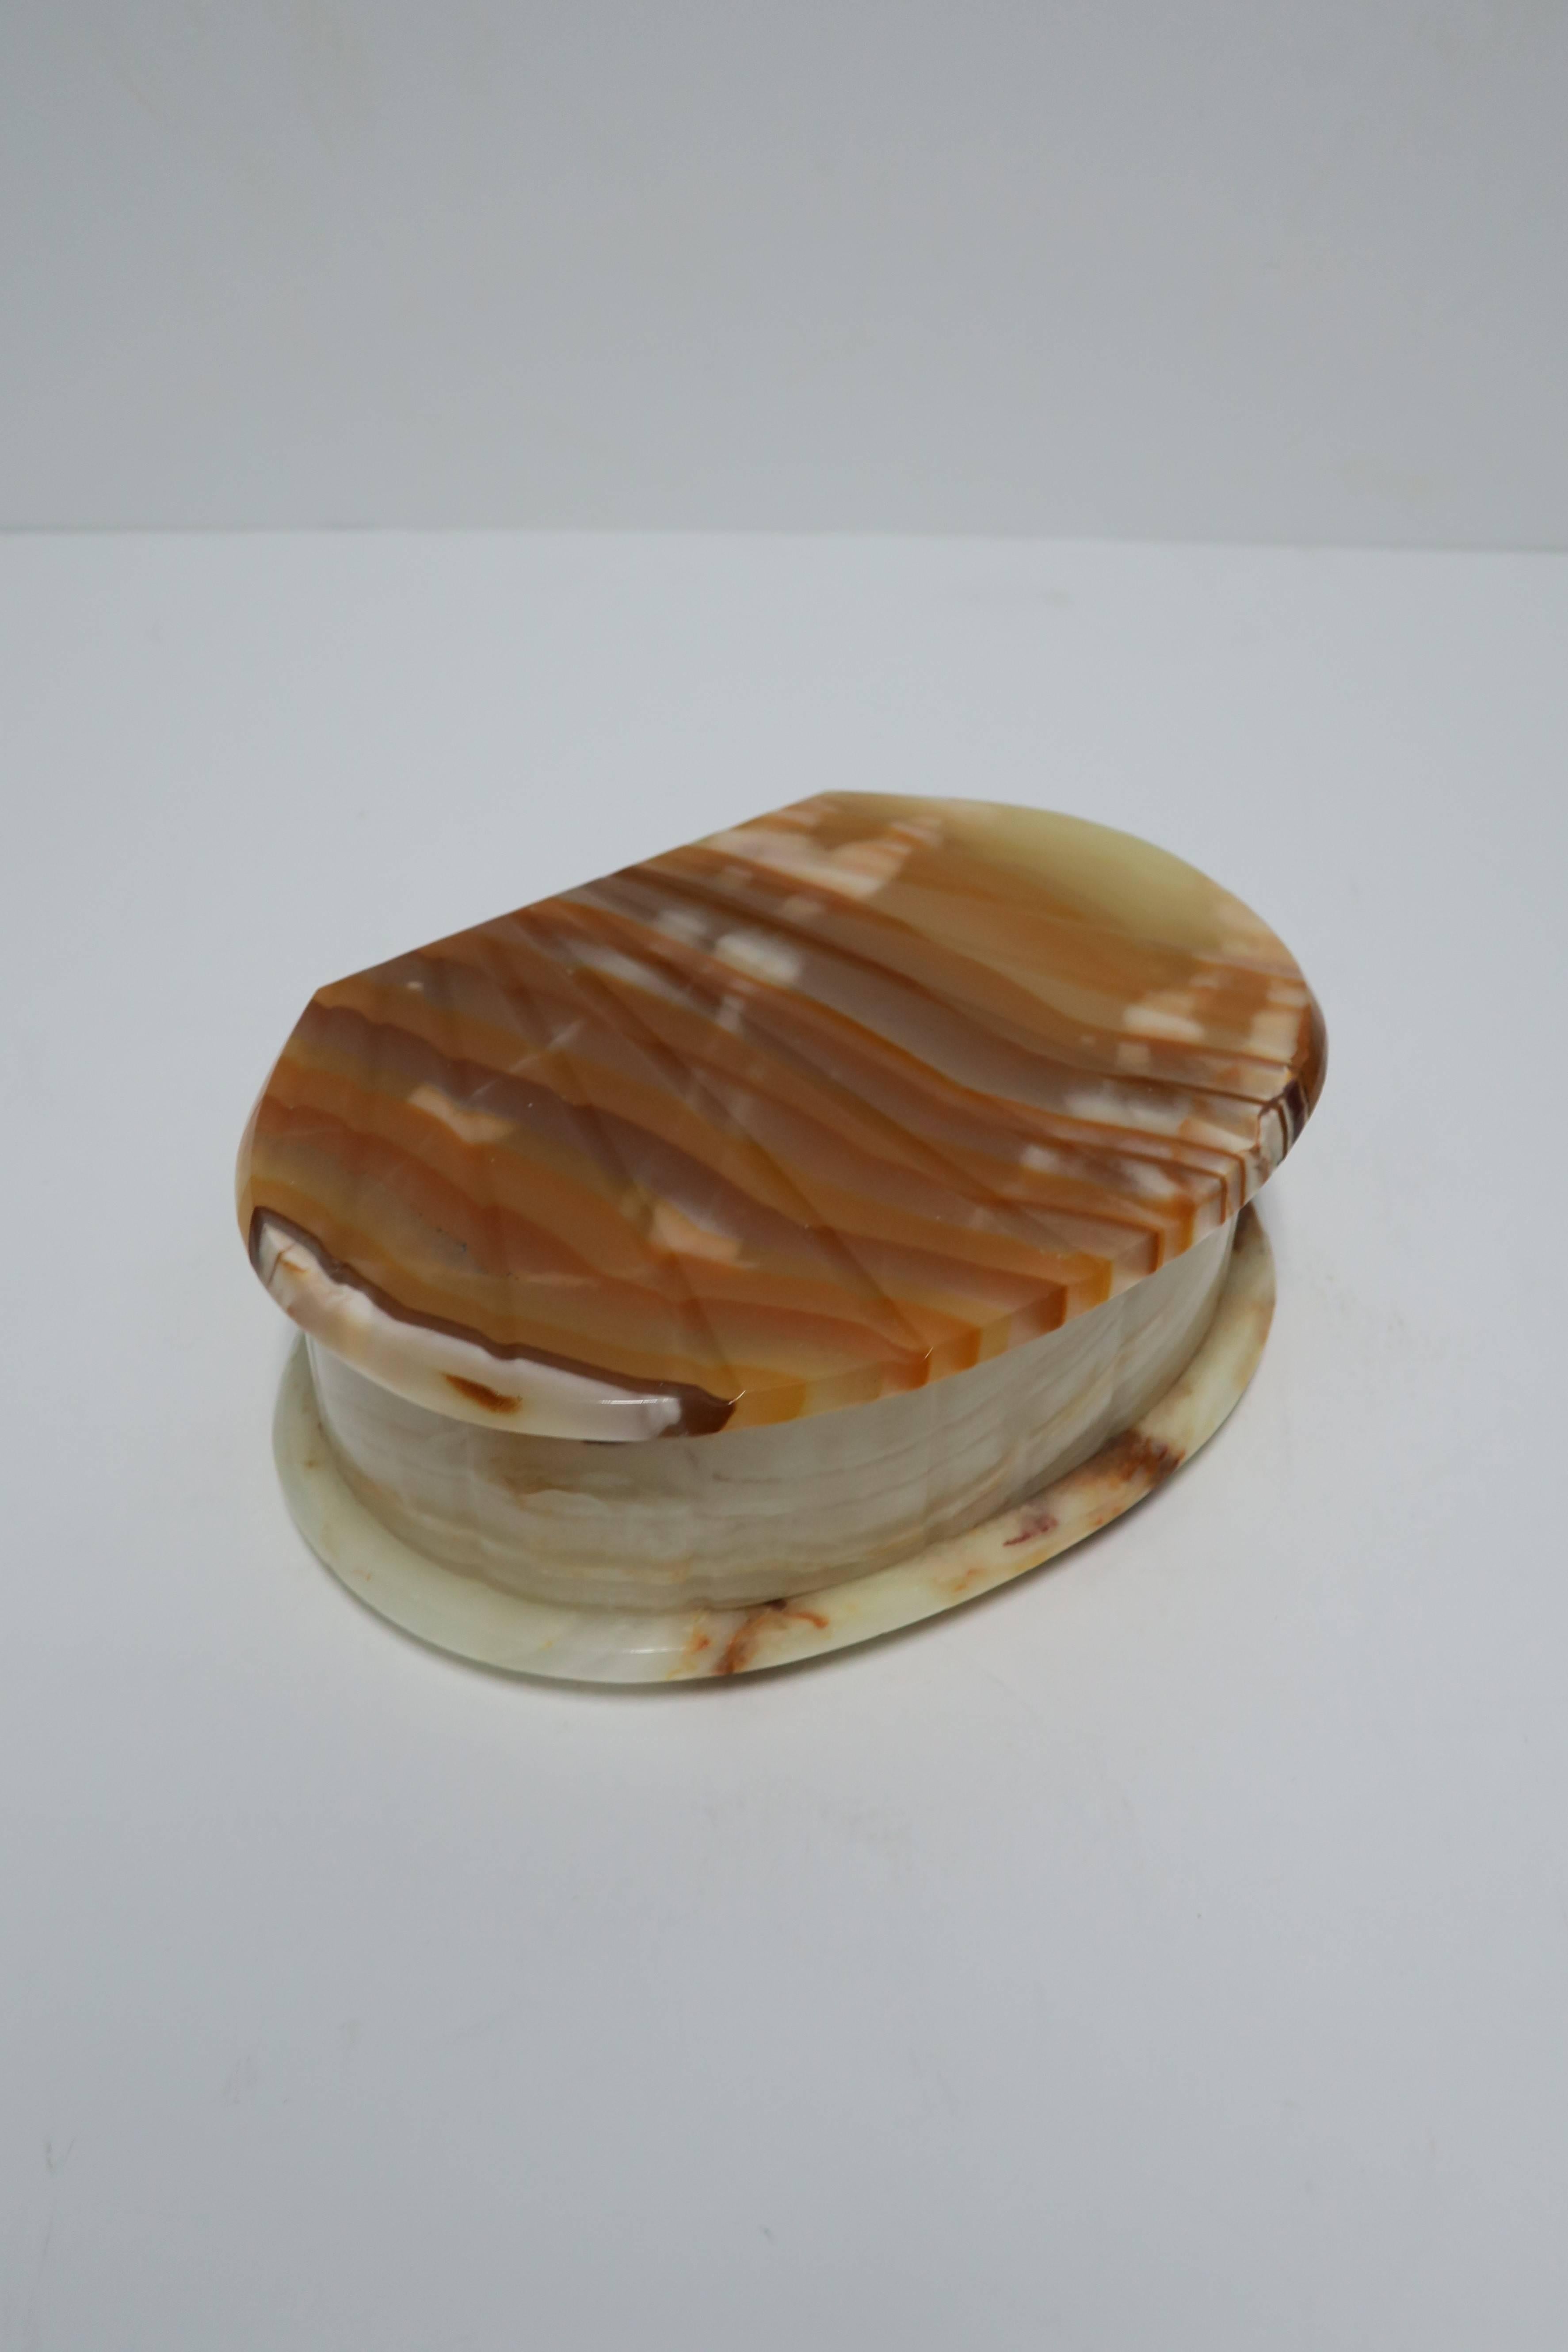 A vintage carved onyx box with hinge. Box is oval in shape with carving resembling a seashell. Colors include an organic combination of cream, off-white, light browns and caramel. 

Item available here online. By request, item can be made available